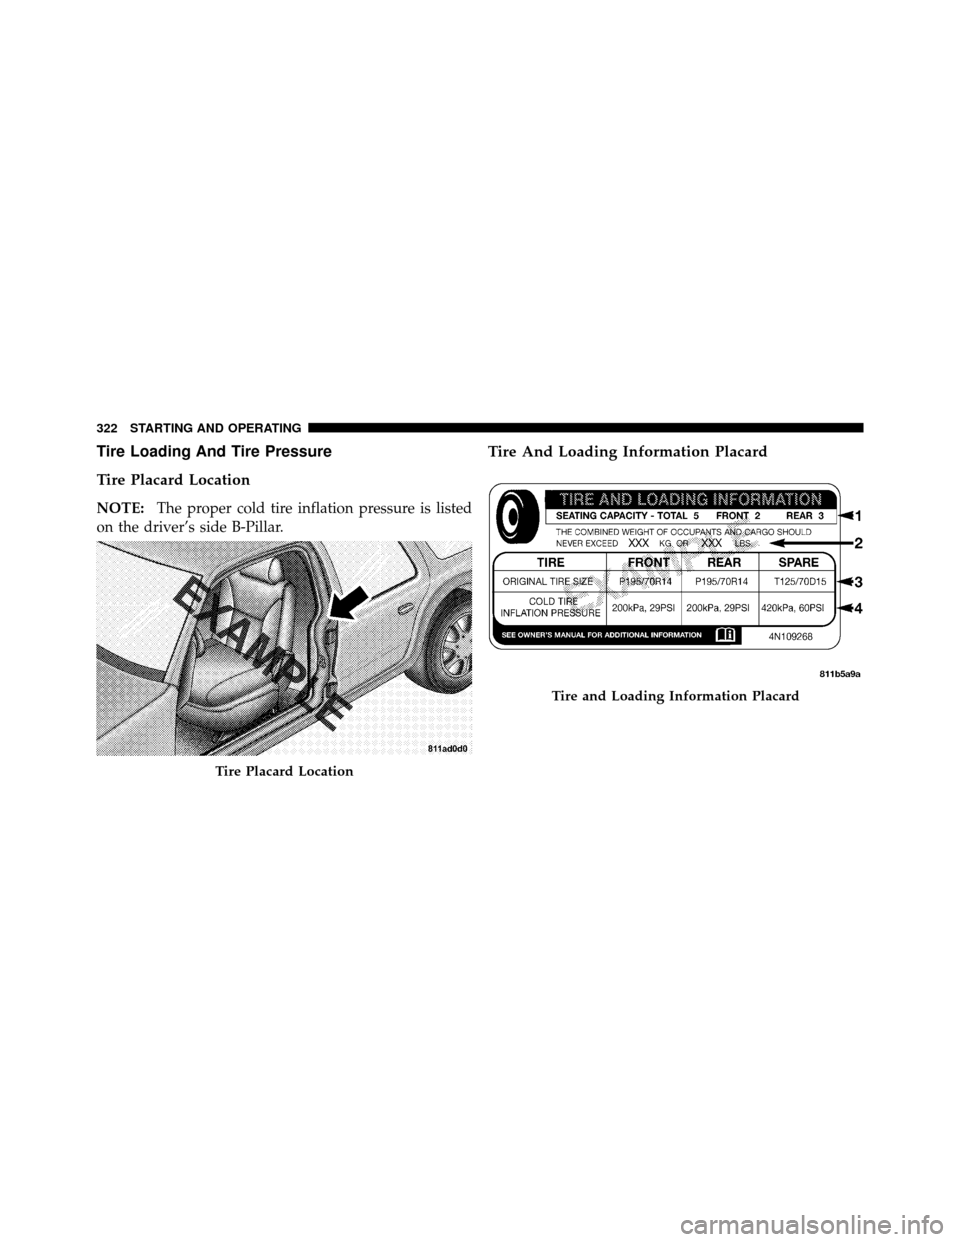 CHRYSLER 200 2011 1.G Owners Manual Tire Loading And Tire Pressure
Tire Placard Location
NOTE:The proper cold tire inflation pressure is listed
on the driver’s side B-Pillar.
Tire And Loading Information Placard
Tire Placard Location
